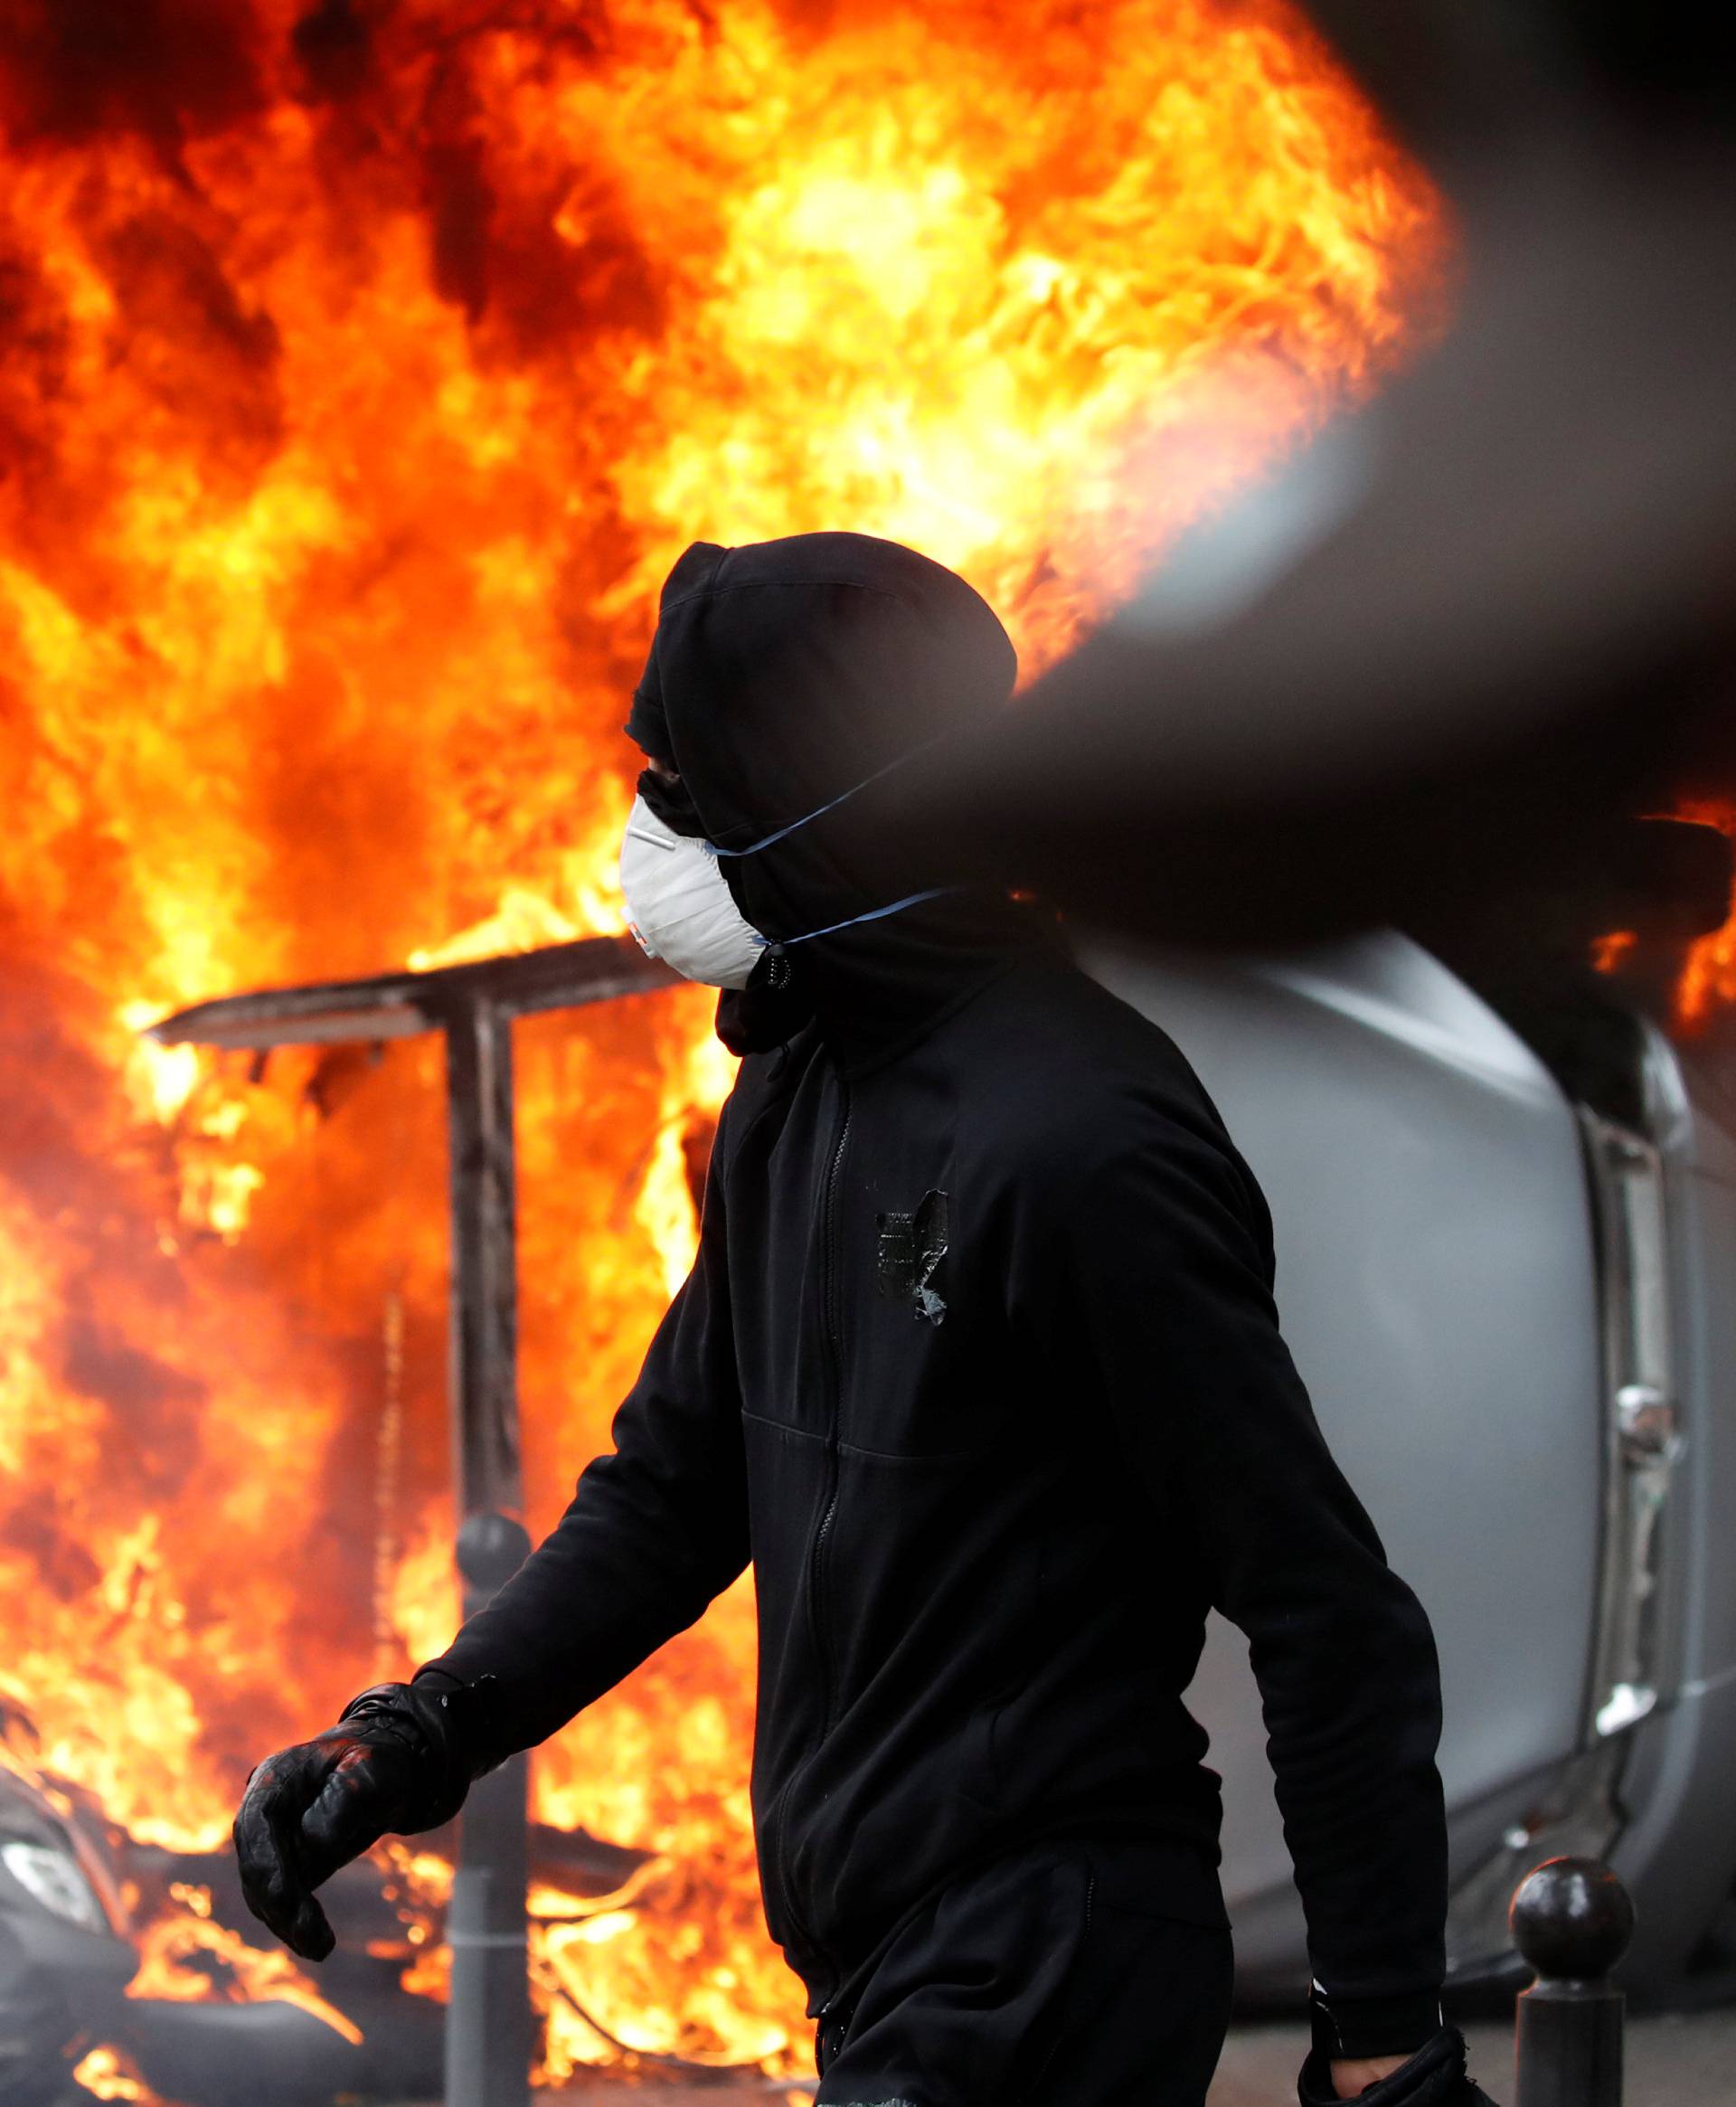 A masked protester walks near a car that burns outside a Renault automobile garage during clashes during the May Day labour union march in Paris